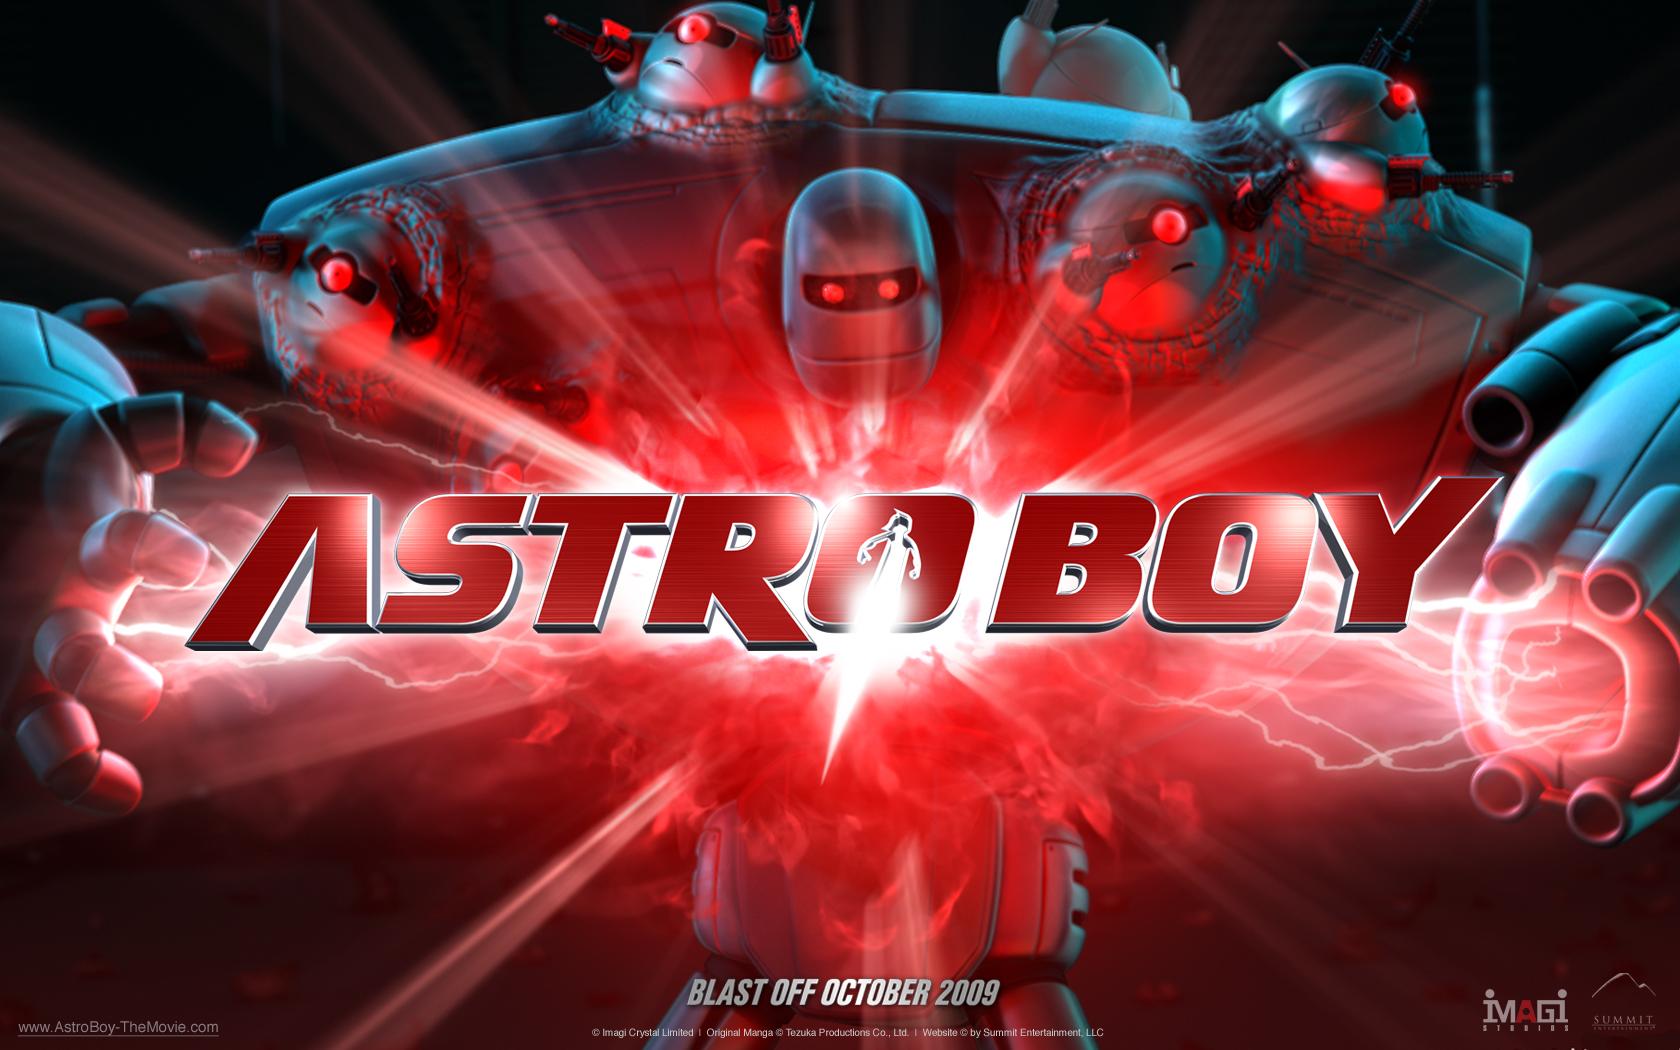 Astro Boy Wallpaper Download For PC